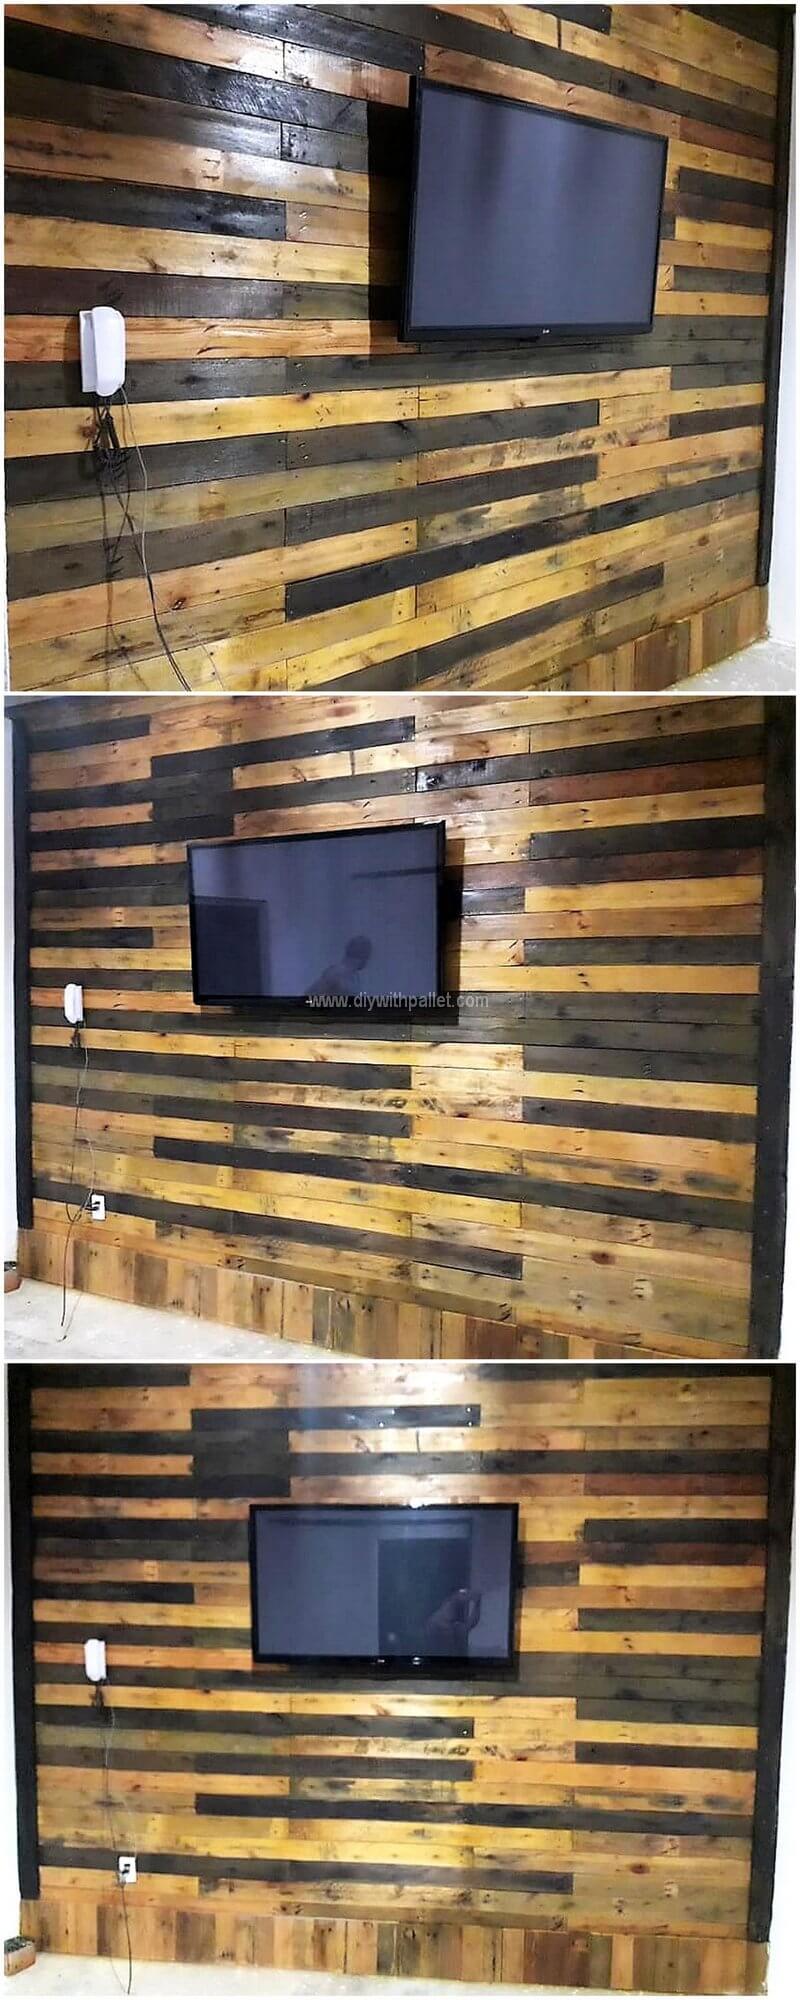 pallet wall works for lcd